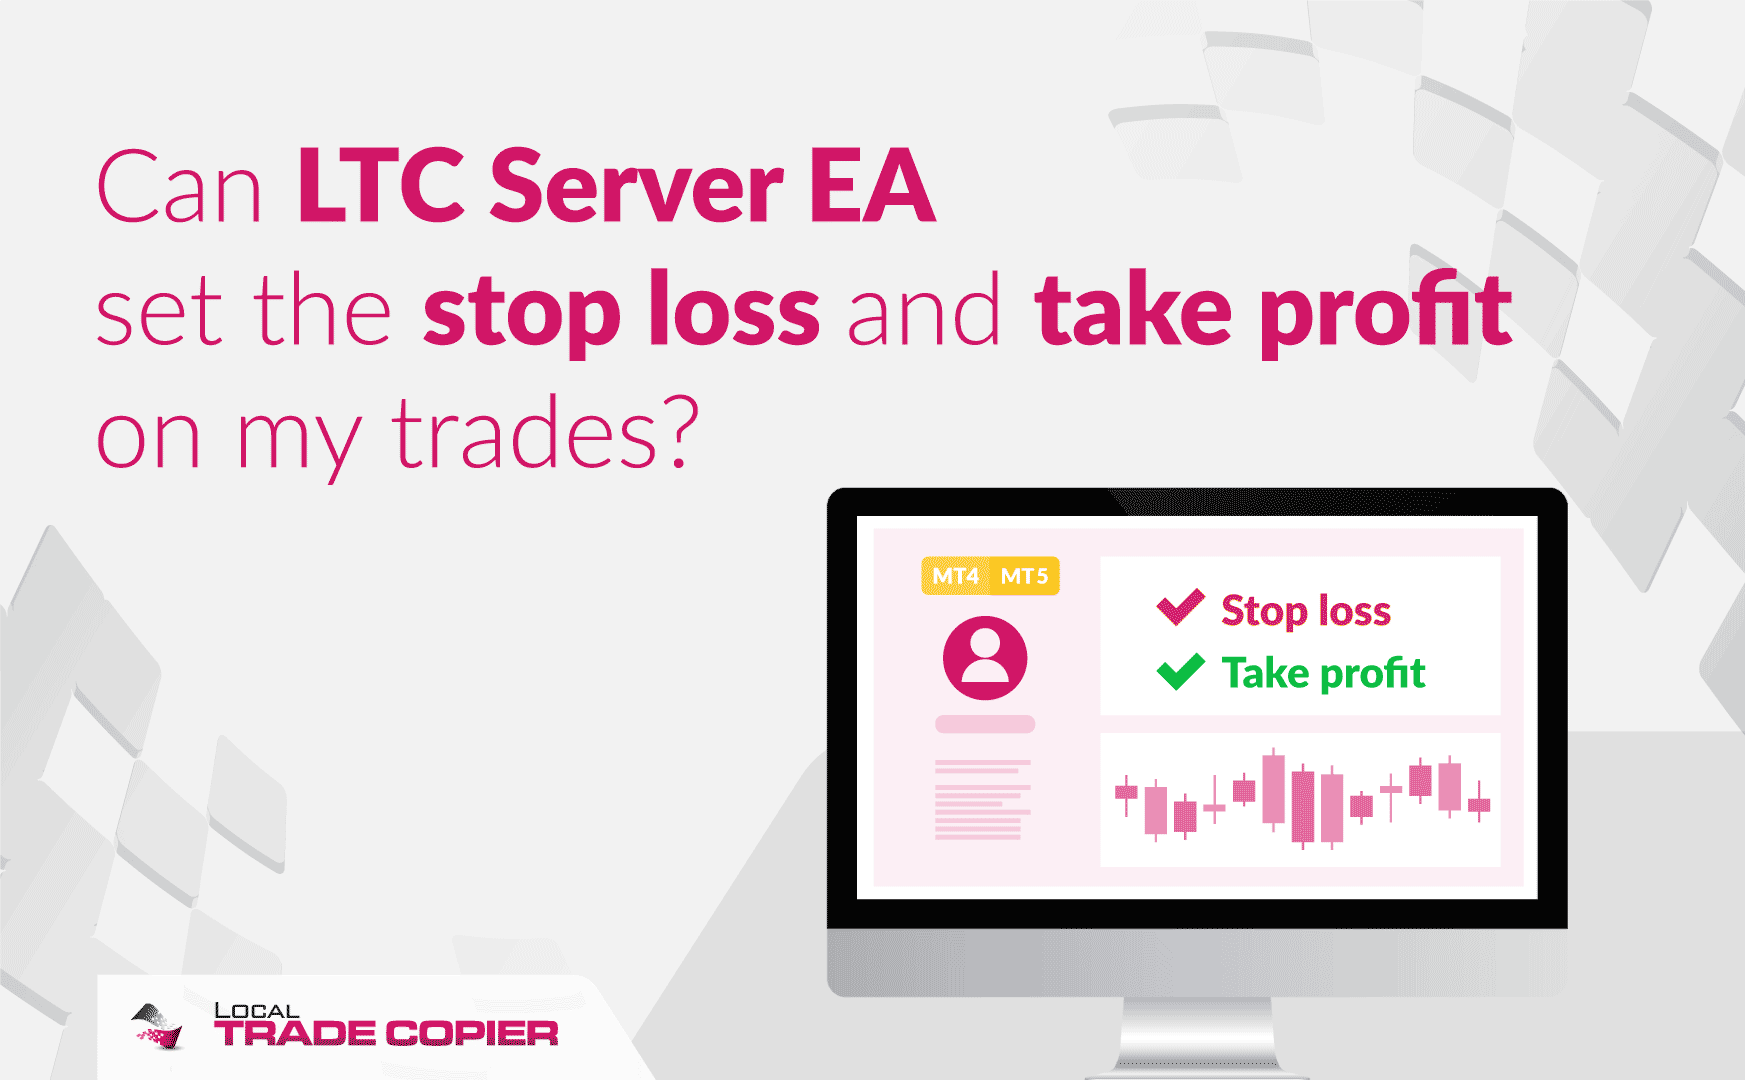 Local-Trade-Copier-Tutorials-can-ltc-server-ea-set-the-stop-loss-and-take-profit-on-my-trades-1745x1080